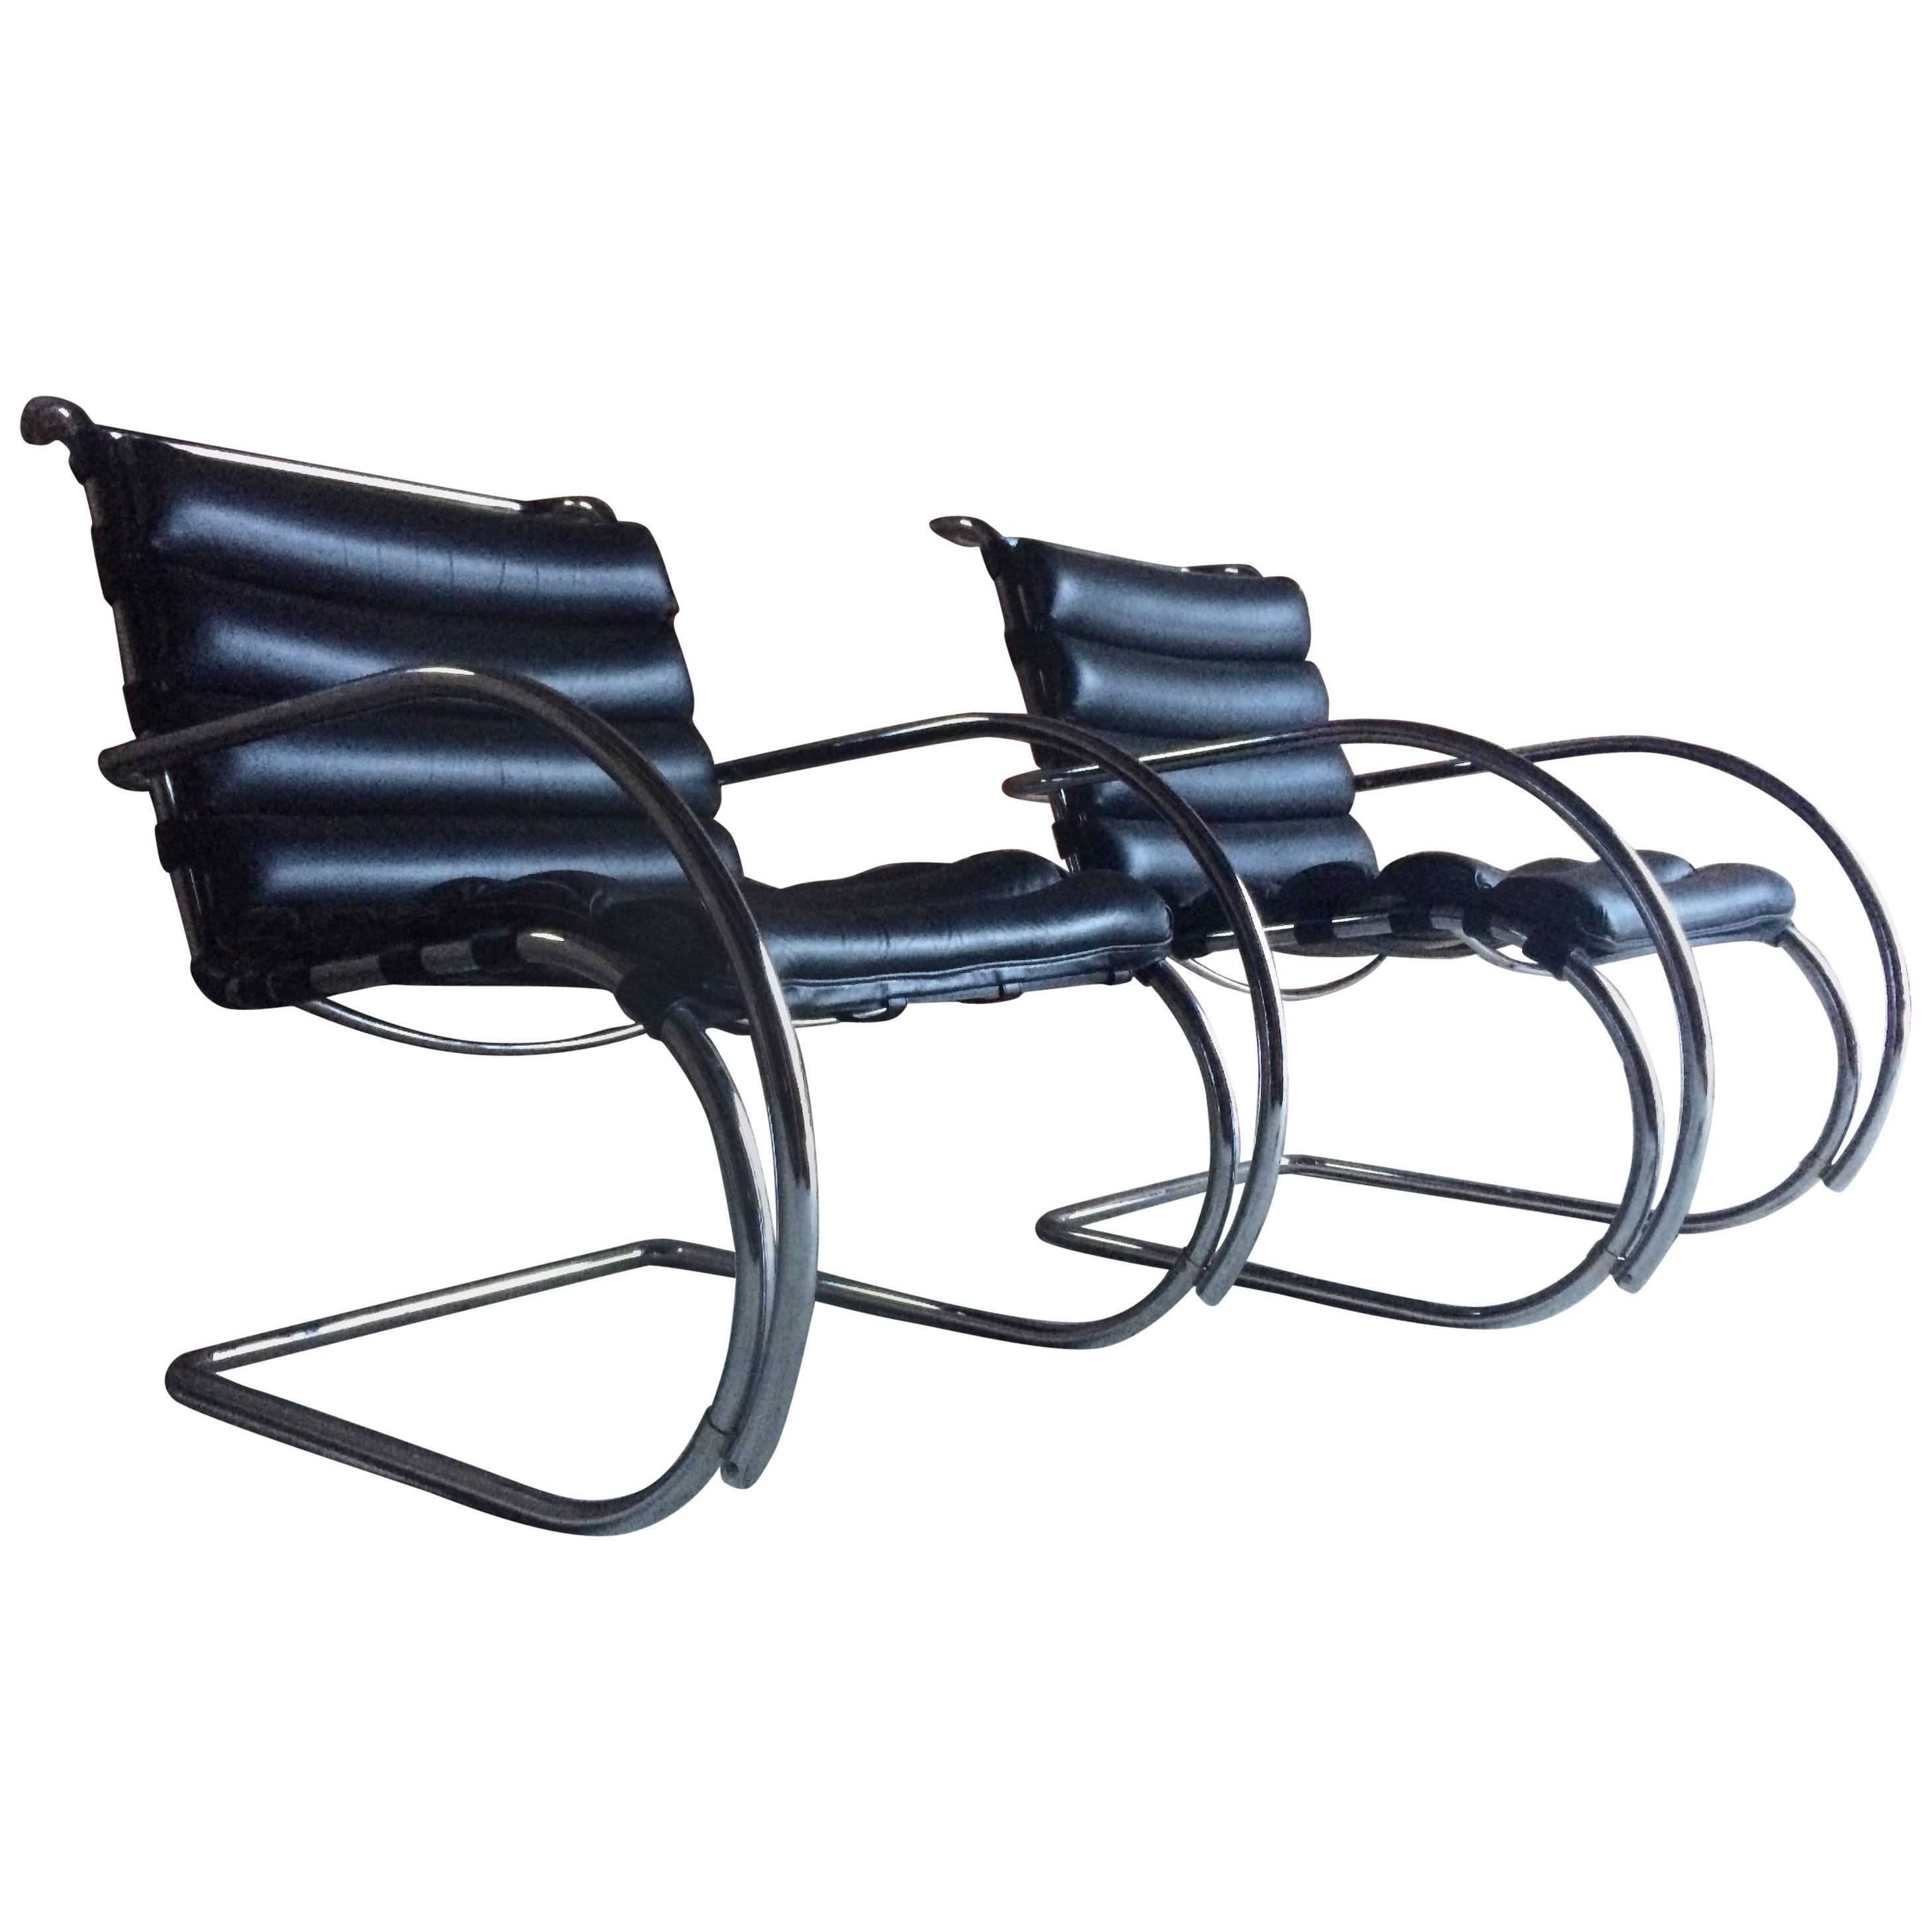 A stunning pair of original Knoll Studio MR lounge chairs by Ludwig Mies van der Rohe, The armchairs are offered in excellent condition, both stamped to frame with the Knoll Studio mark and signed by Mies van der Rohe, they also have the Knoll lable